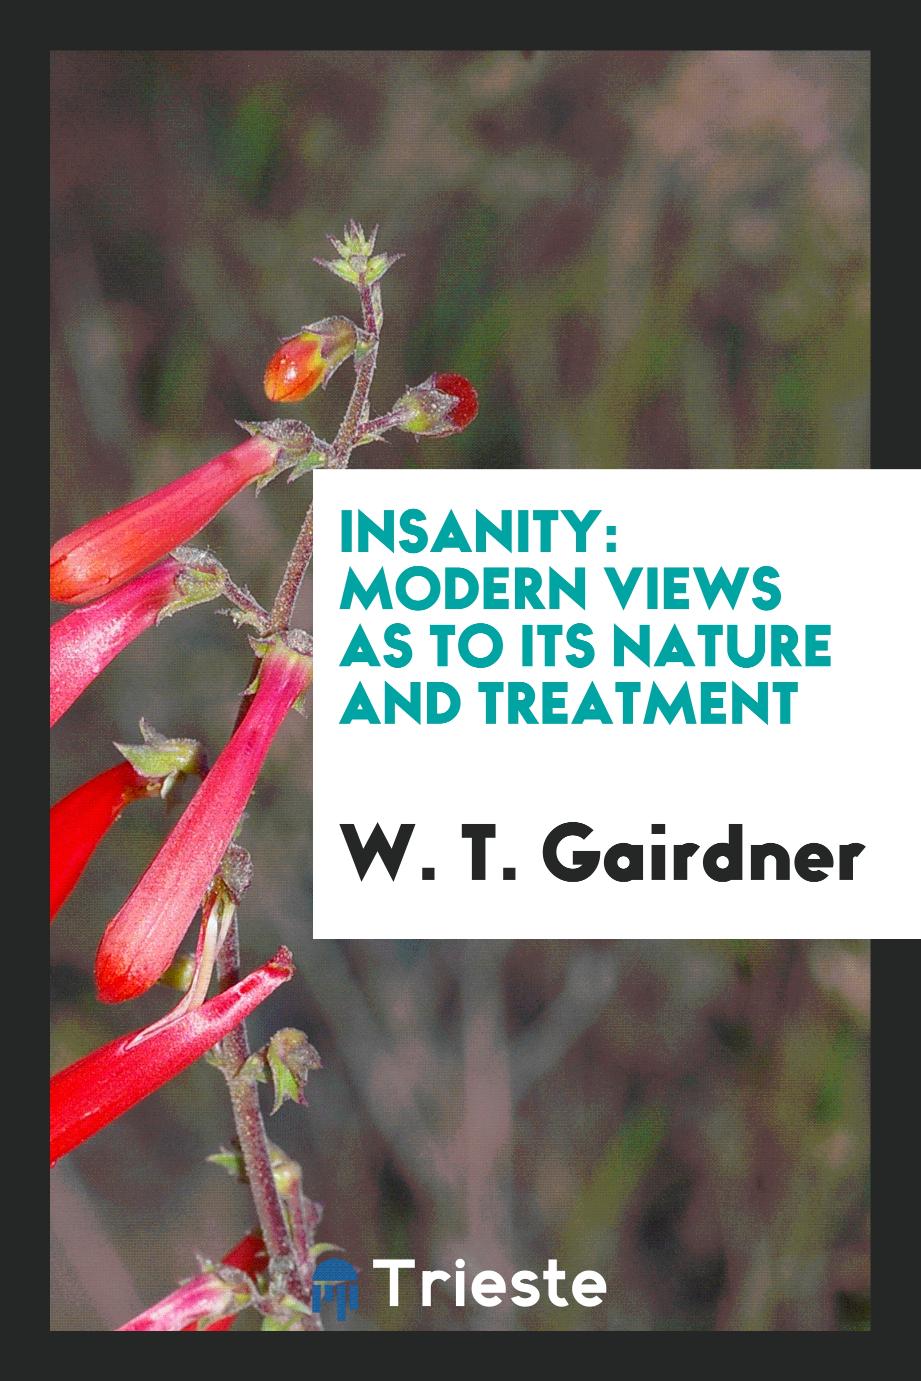 Insanity: modern views as to its nature and treatment